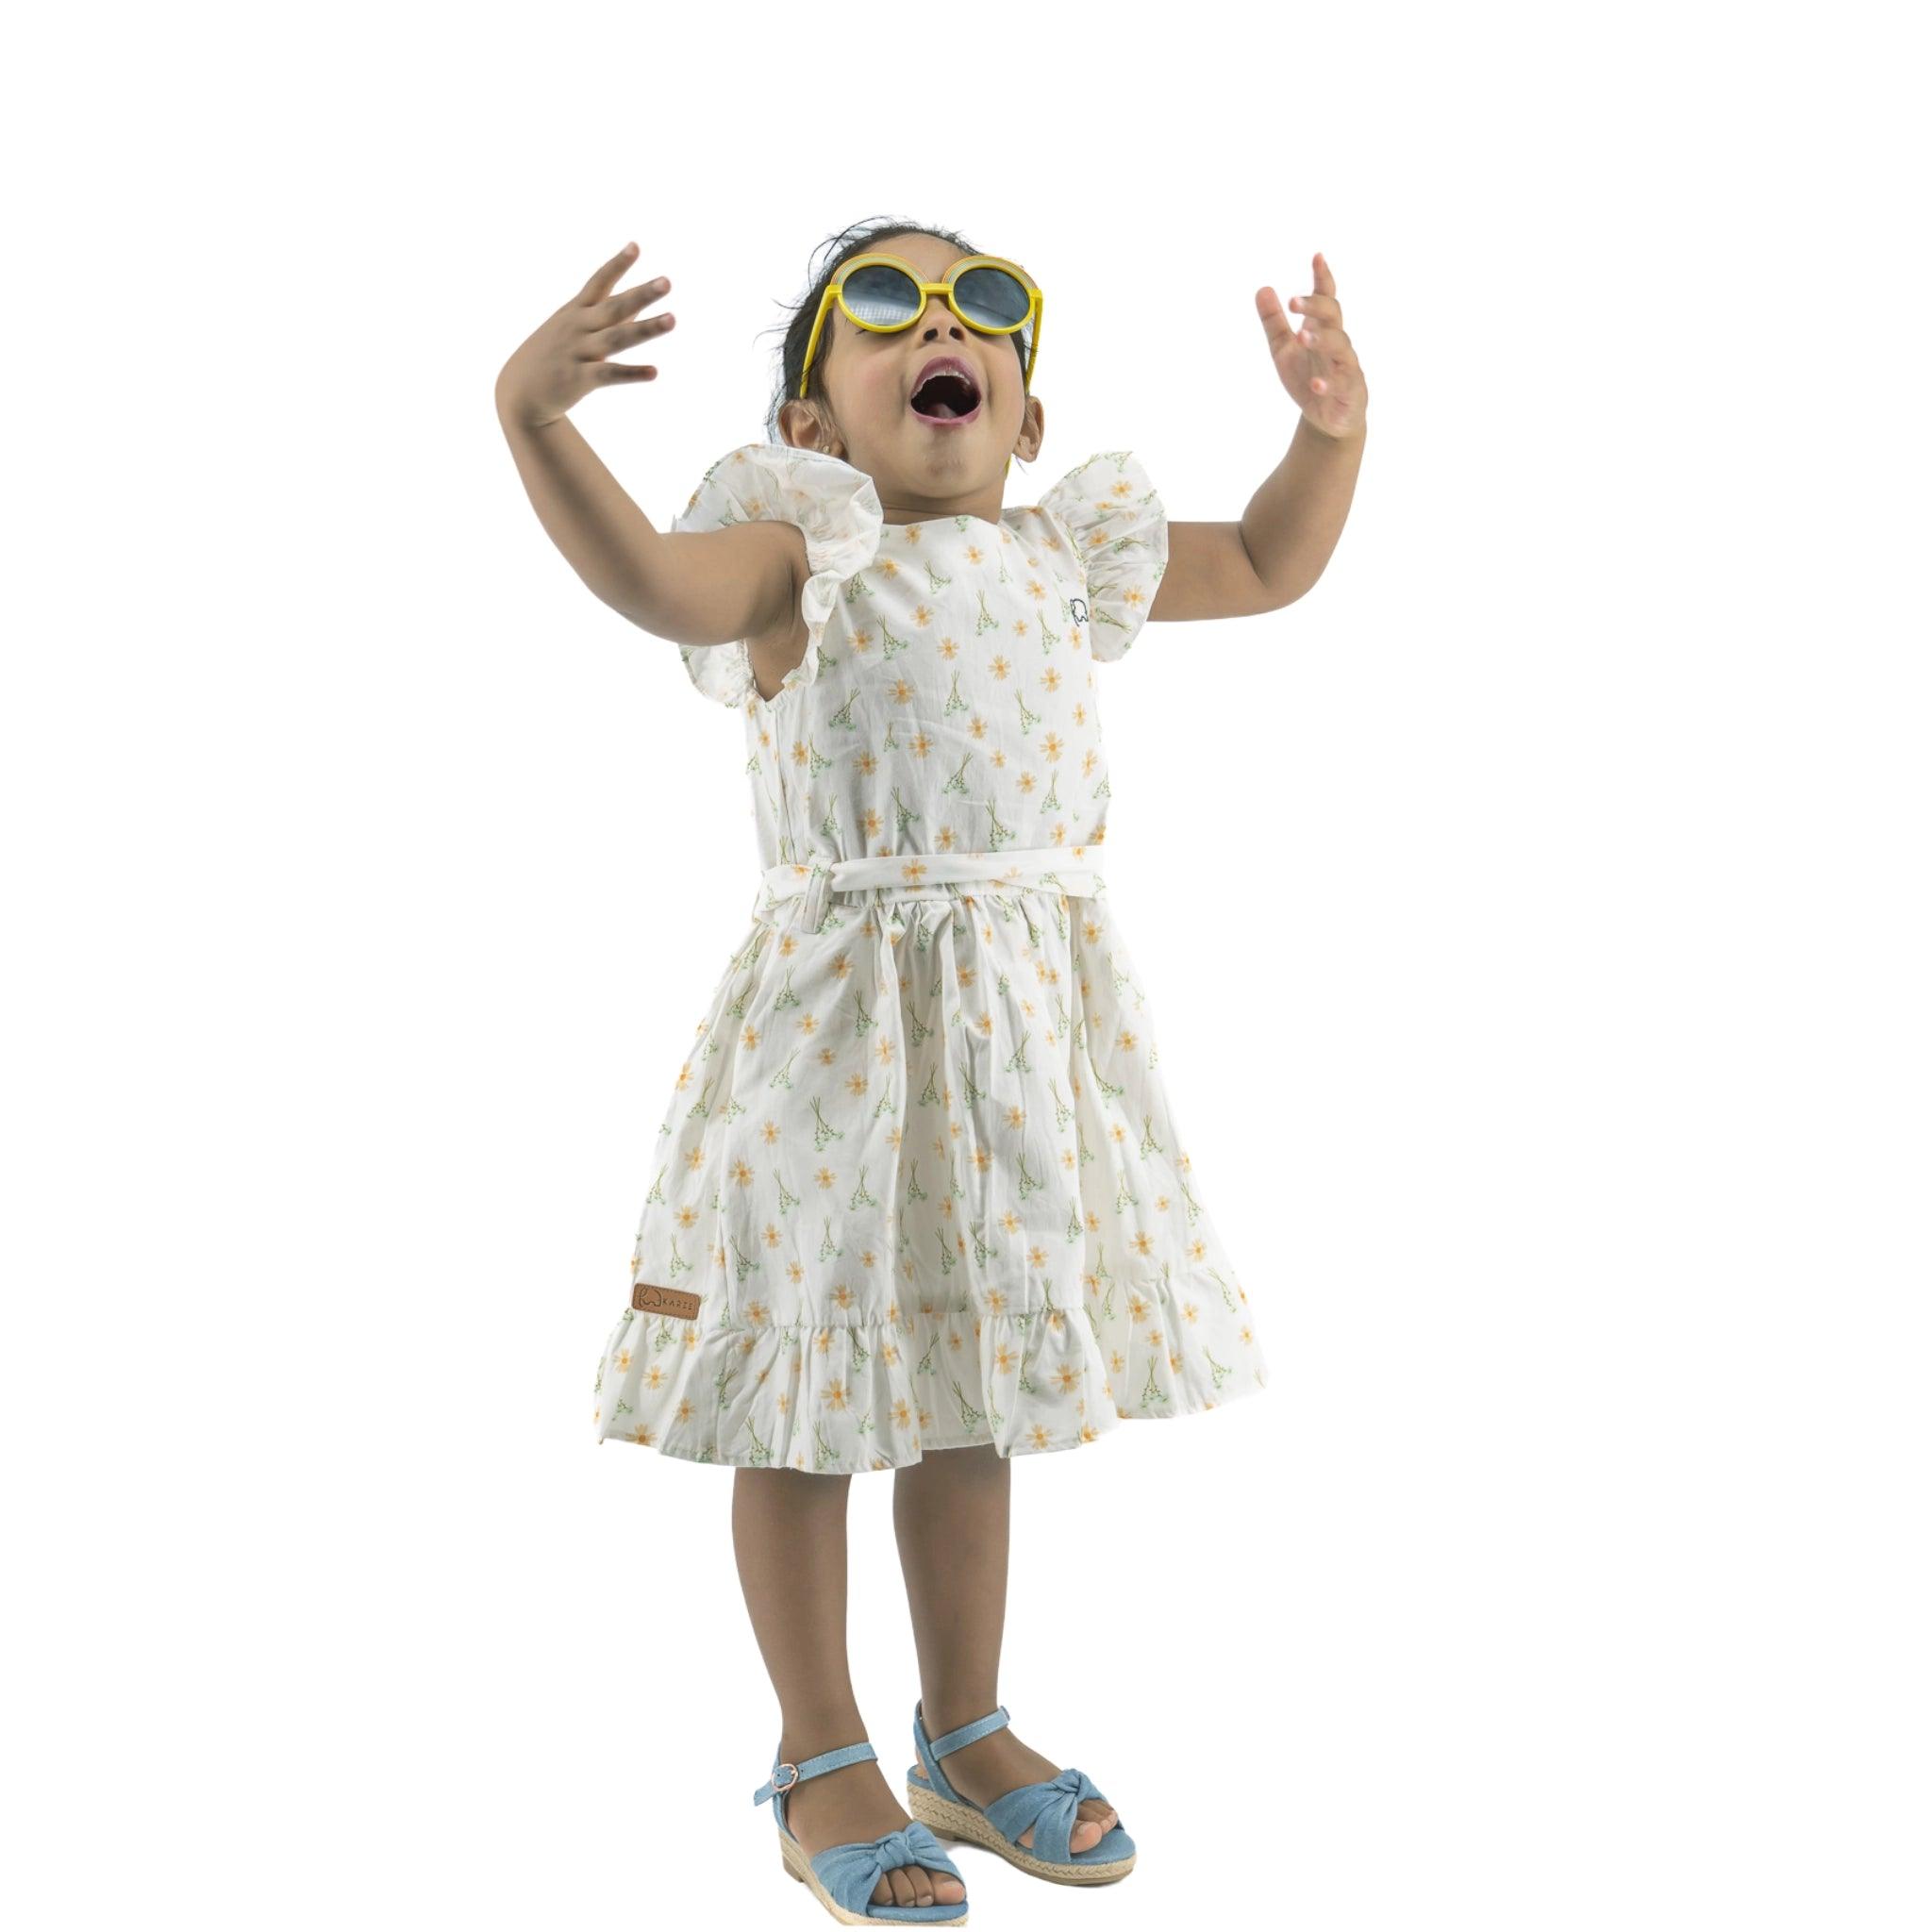 A young girl wearing a Karee Petite Blossom Cotton Dress in Smoked Pearl, sandals, and oversized yellow goggles, joyfully raises her arms, isolated on a white background.